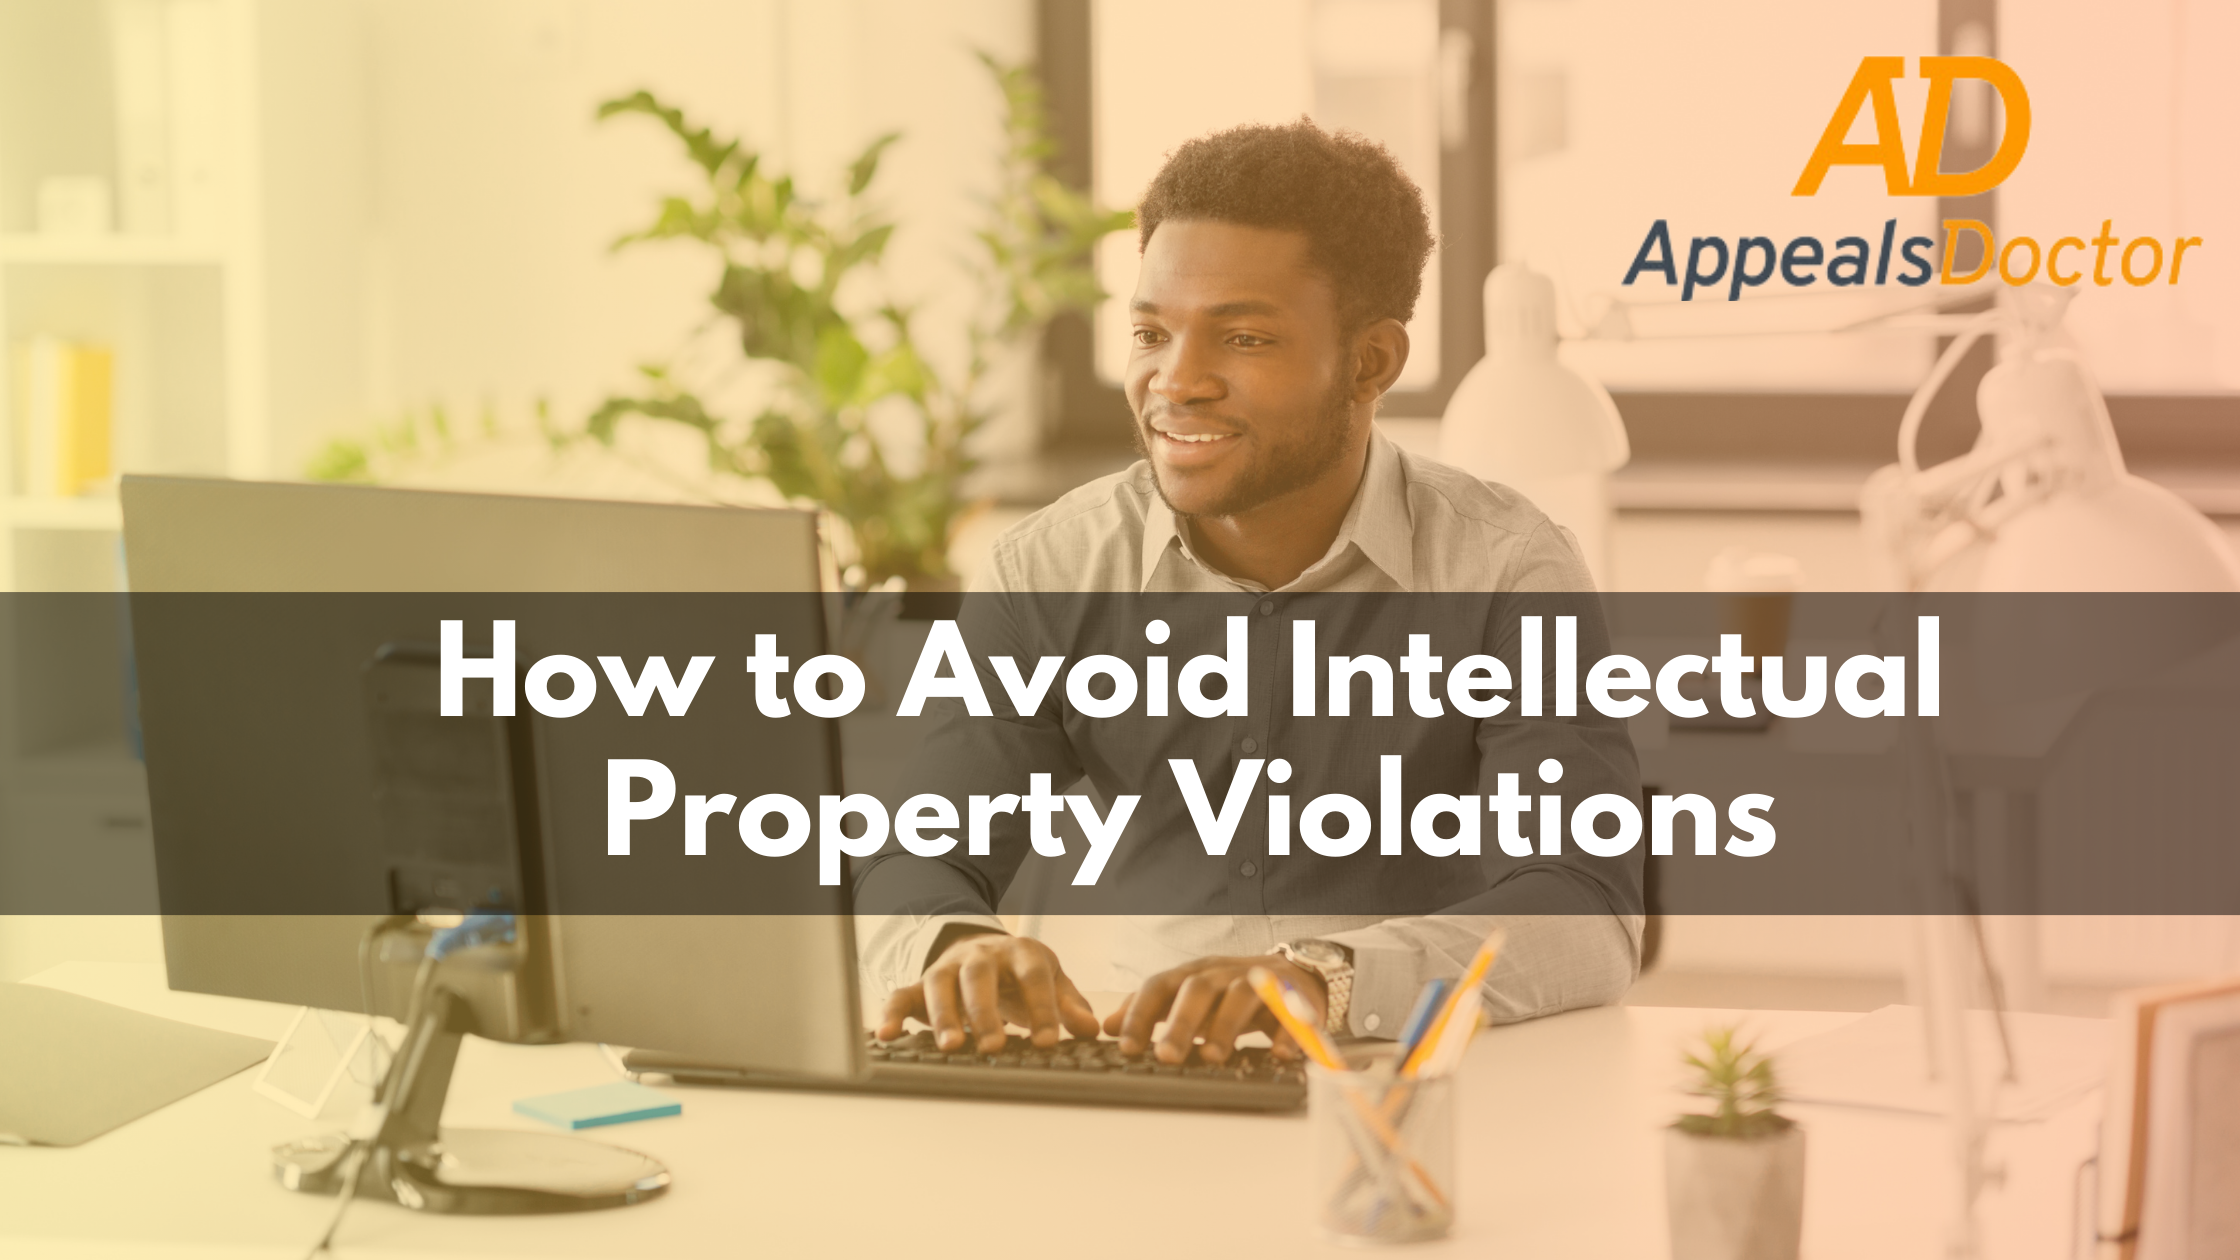 How to Avoid Intellectual Property Violations